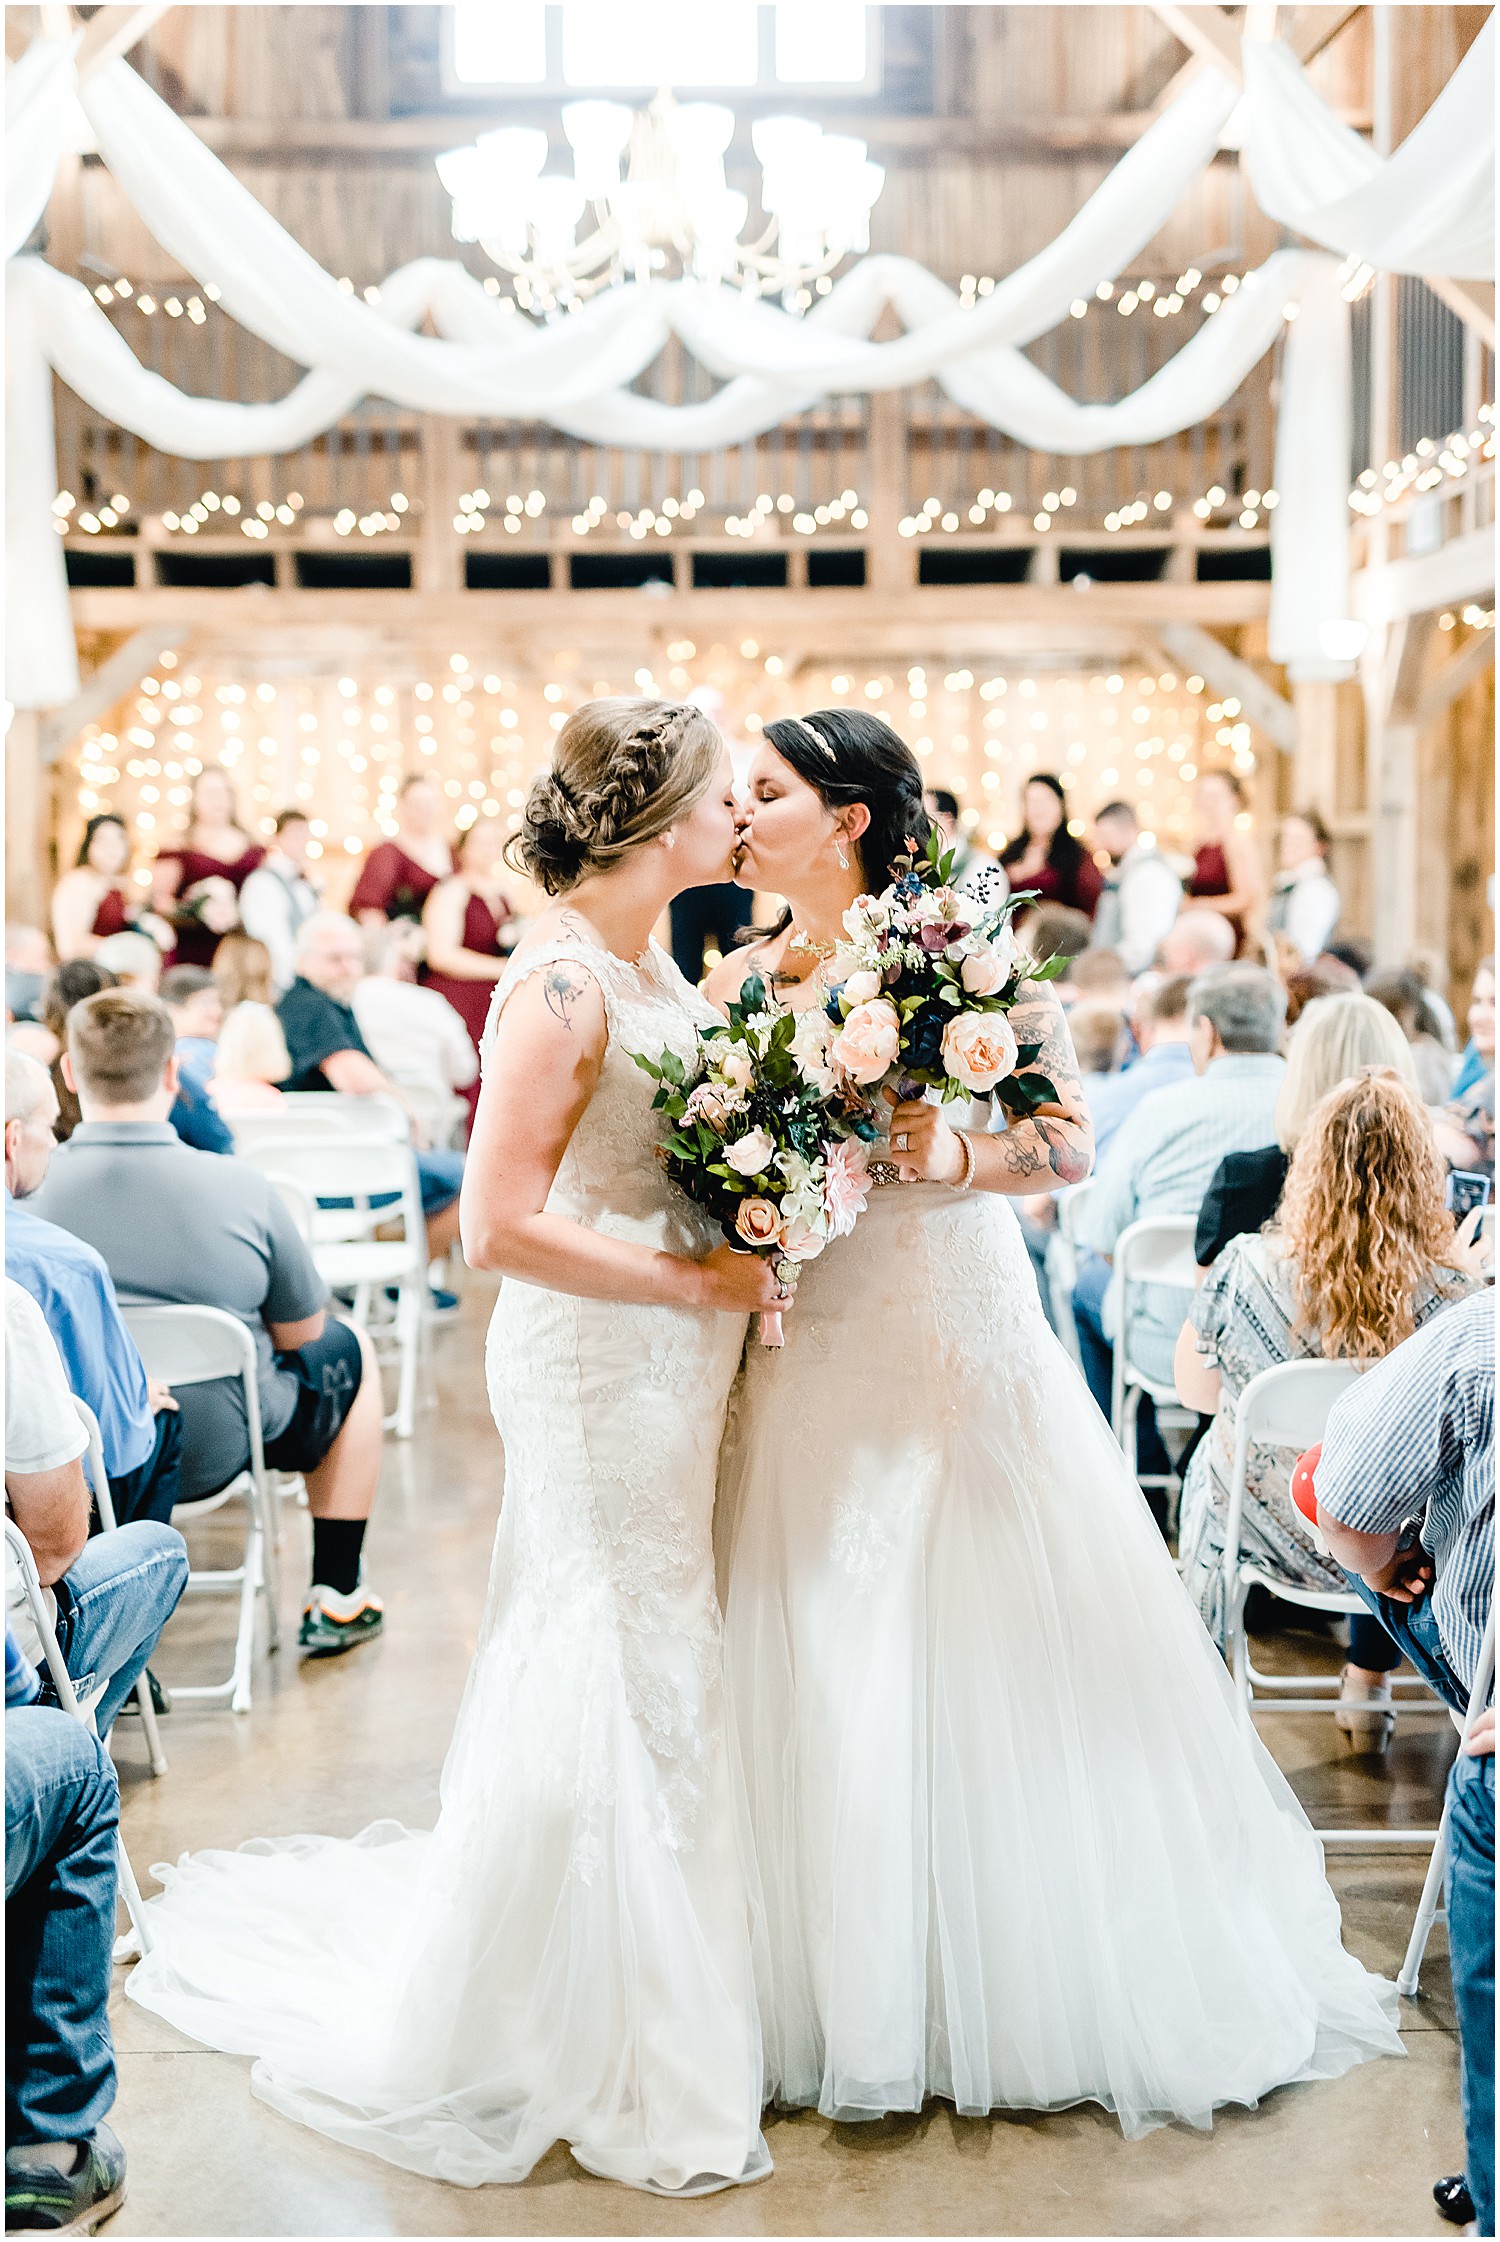 brides kissing at end of alter legacy barn wedding ceremony